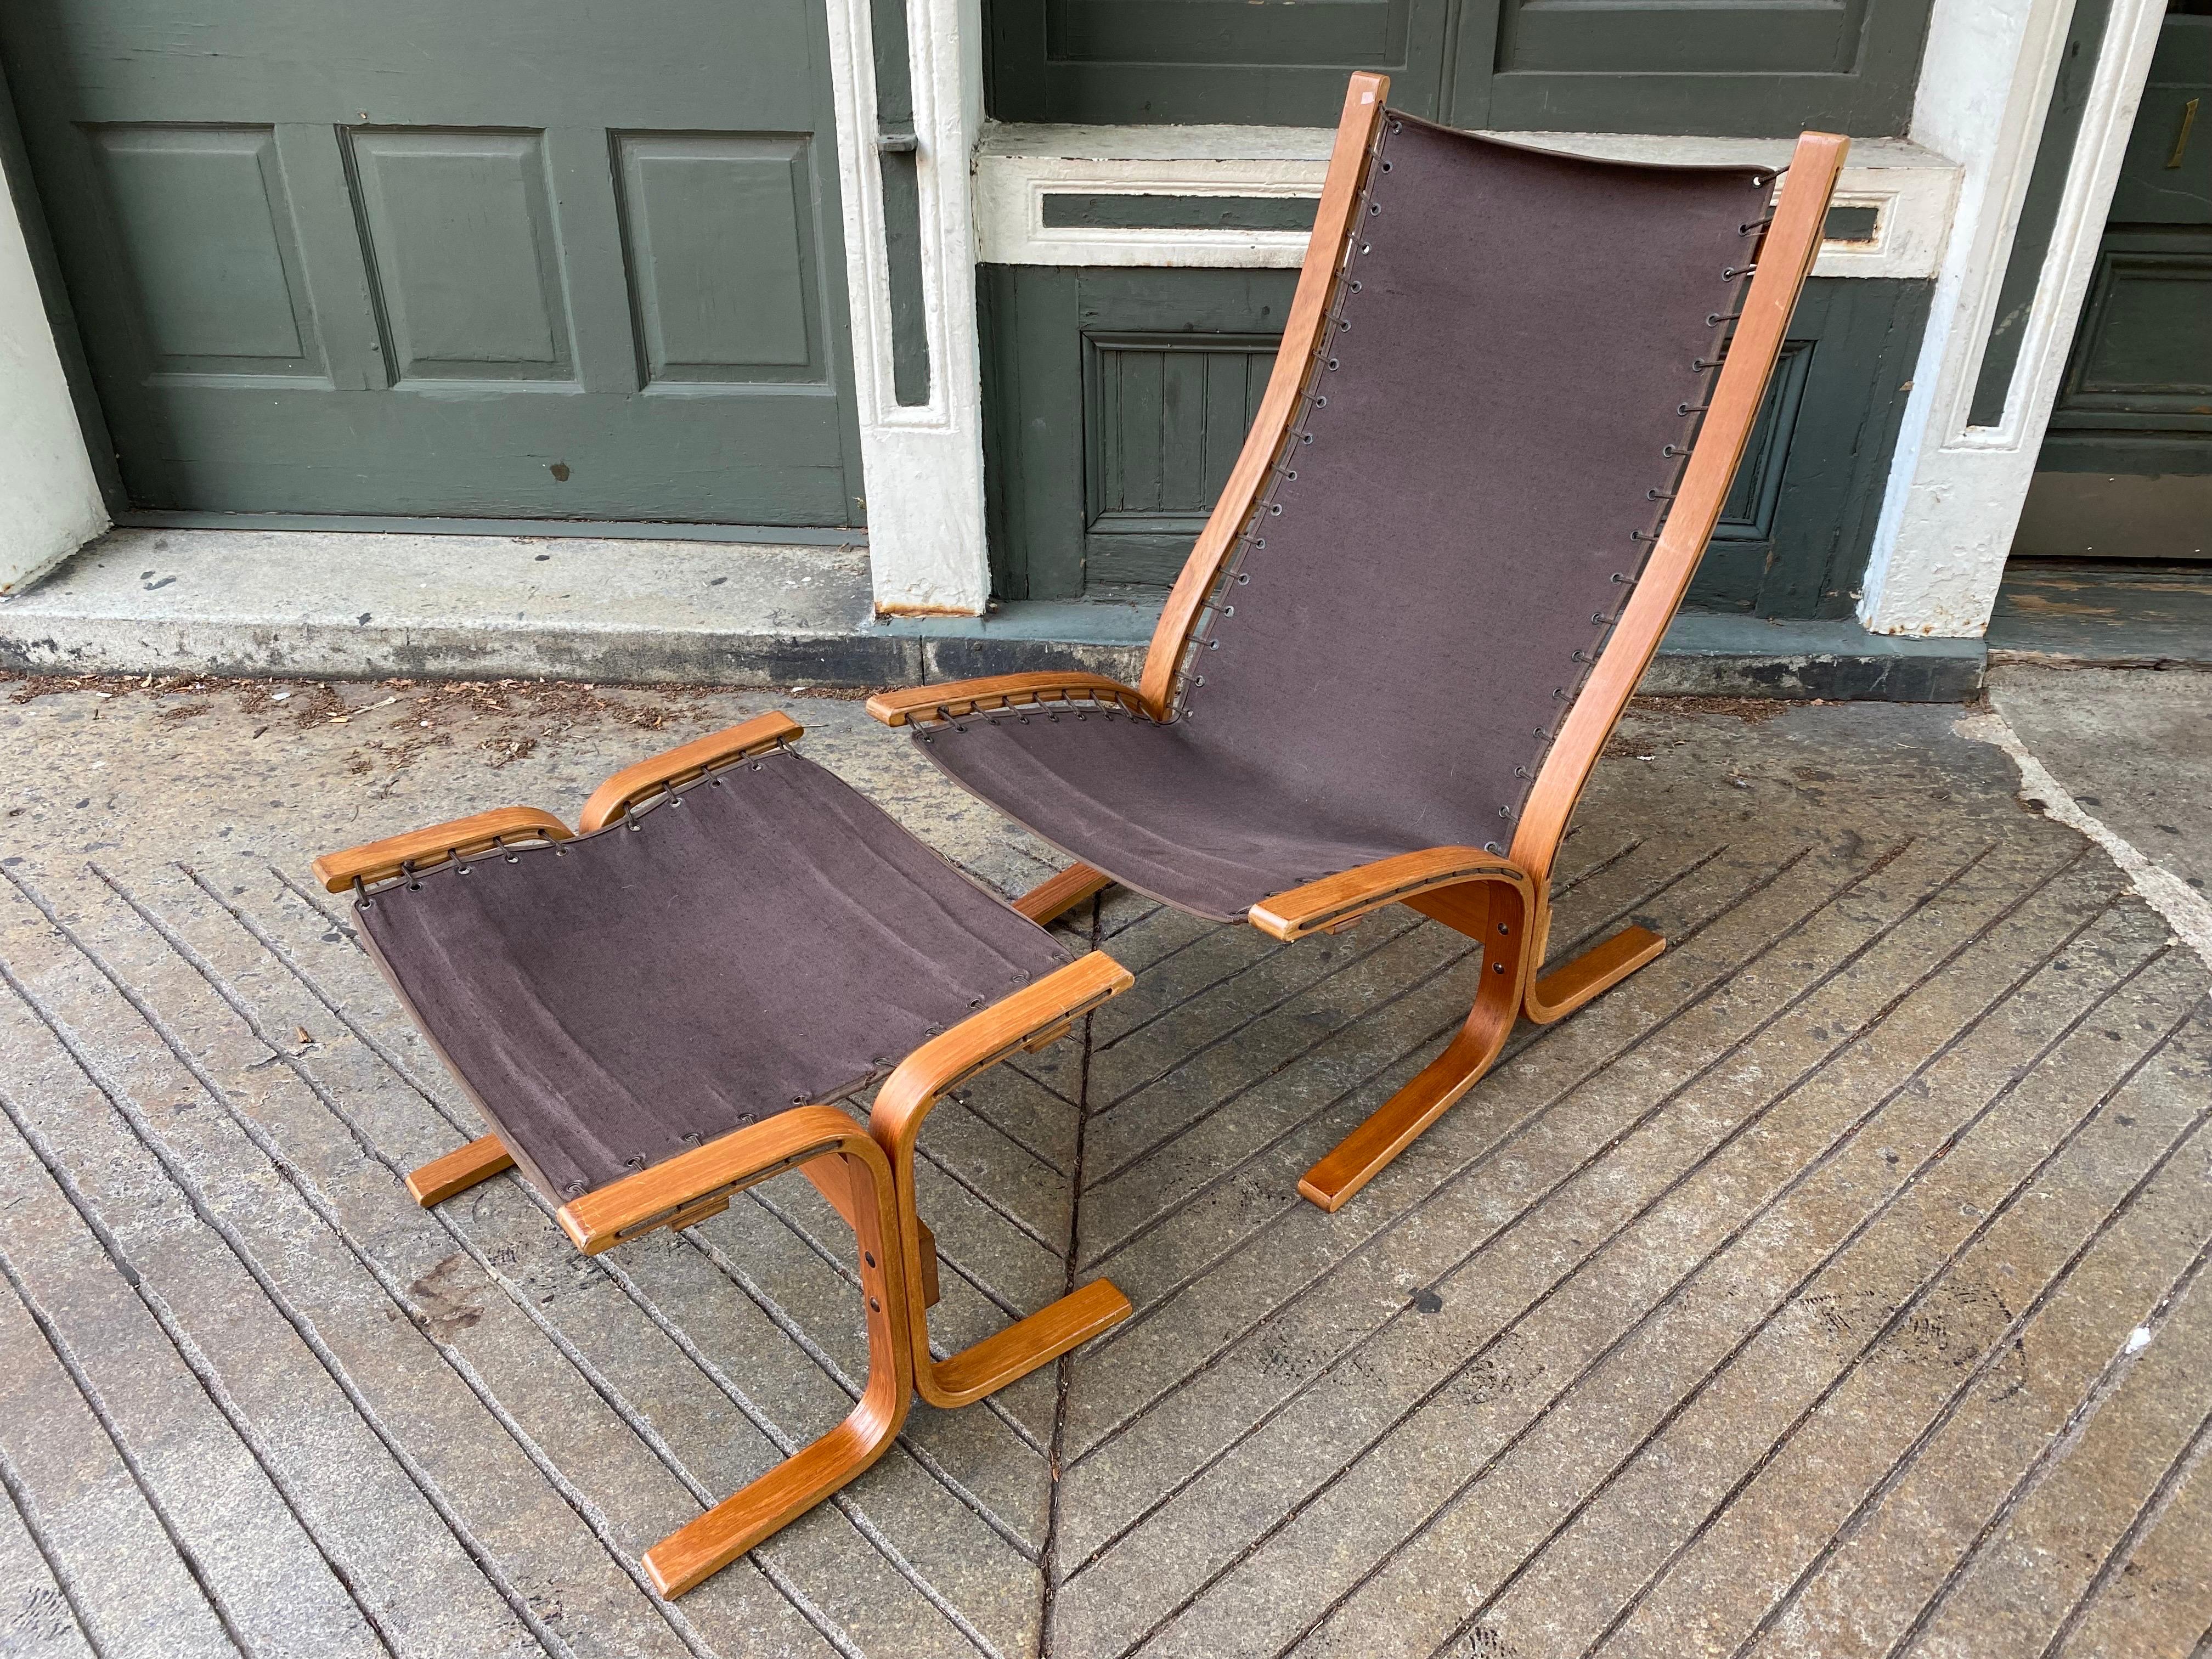 Ingmar Relling Siesta lounge chair and ottoman for Westnofa Norway. In nice shape with a newer upholstered cream colored Leather Seat and Ottoman Pad. Pad can be laid in either direction to even the wear of leather. Sits very well and has a great